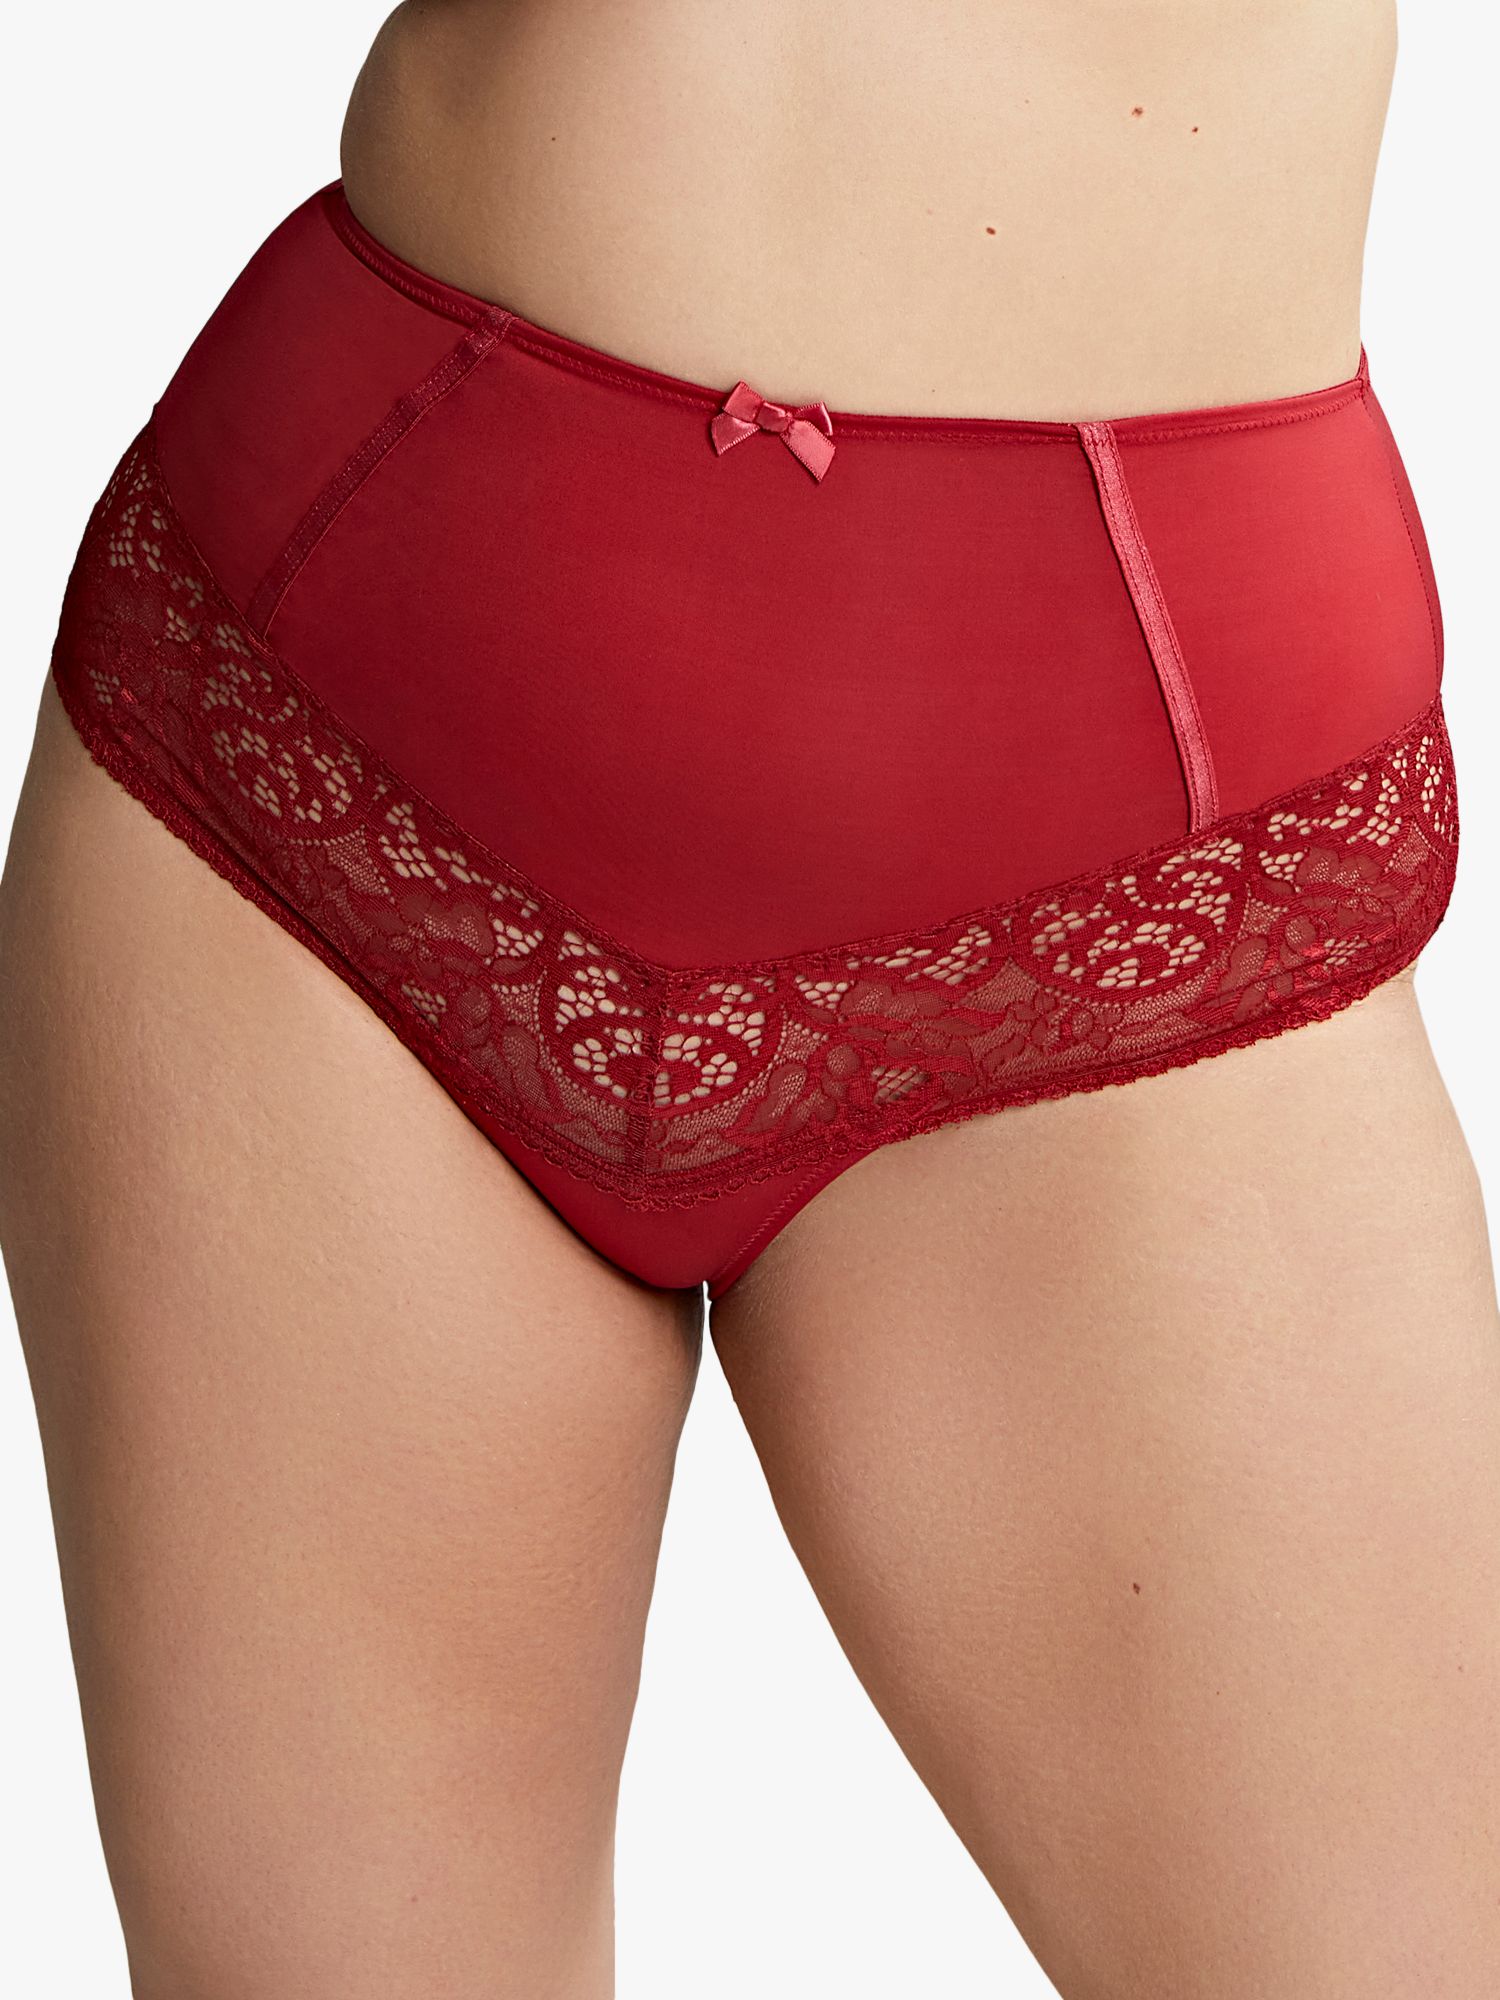 Panache Ana Lace Knickers, Salsa Red at John Lewis & Partners